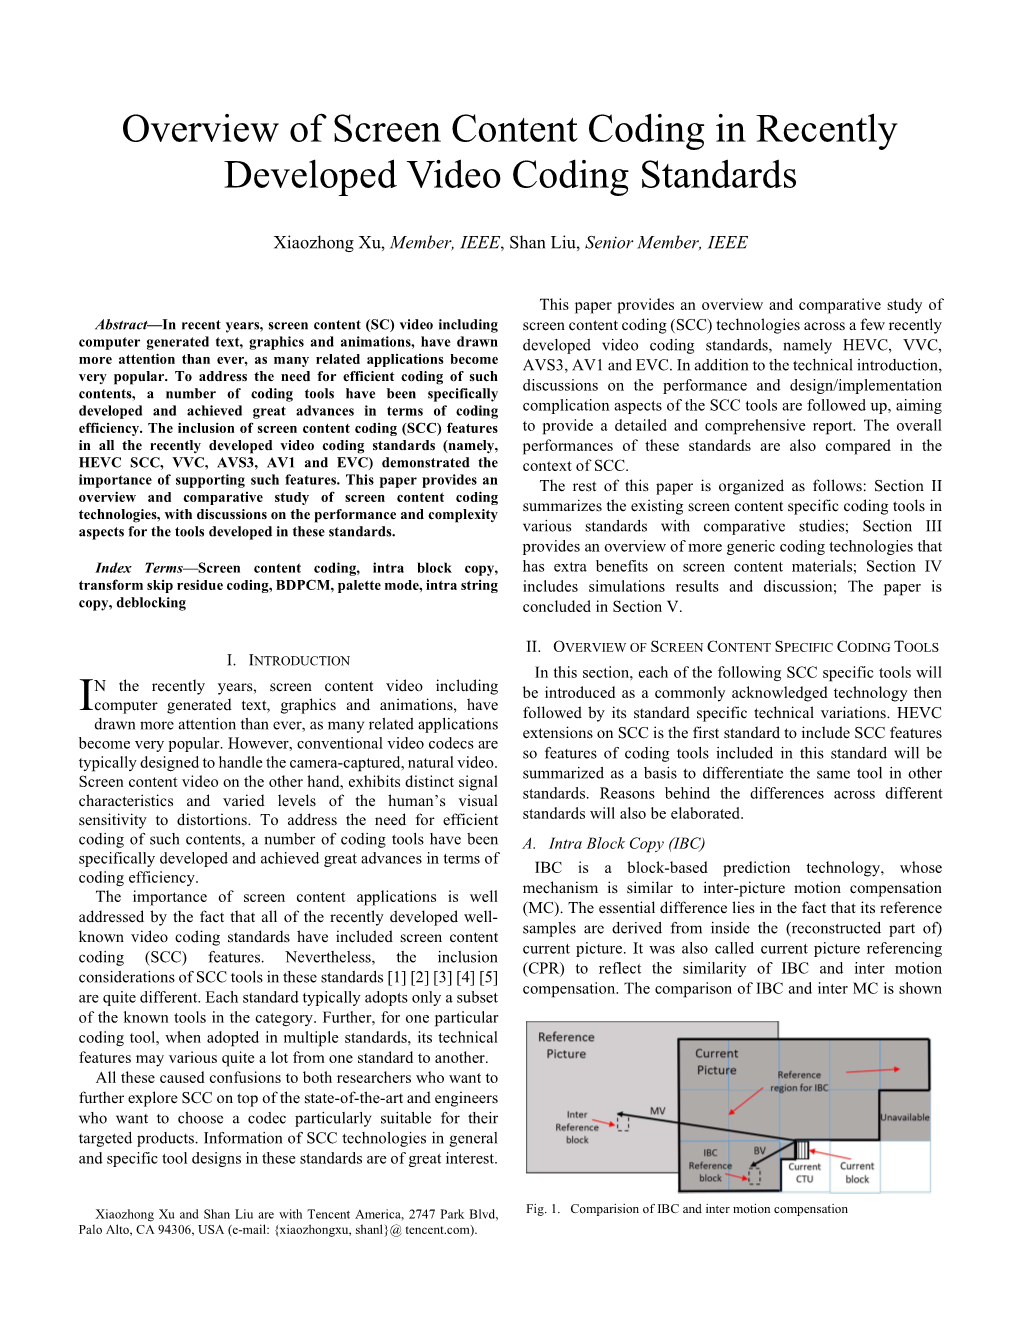 Overview of Screen Content Coding in Recently Developed Video Coding Standards